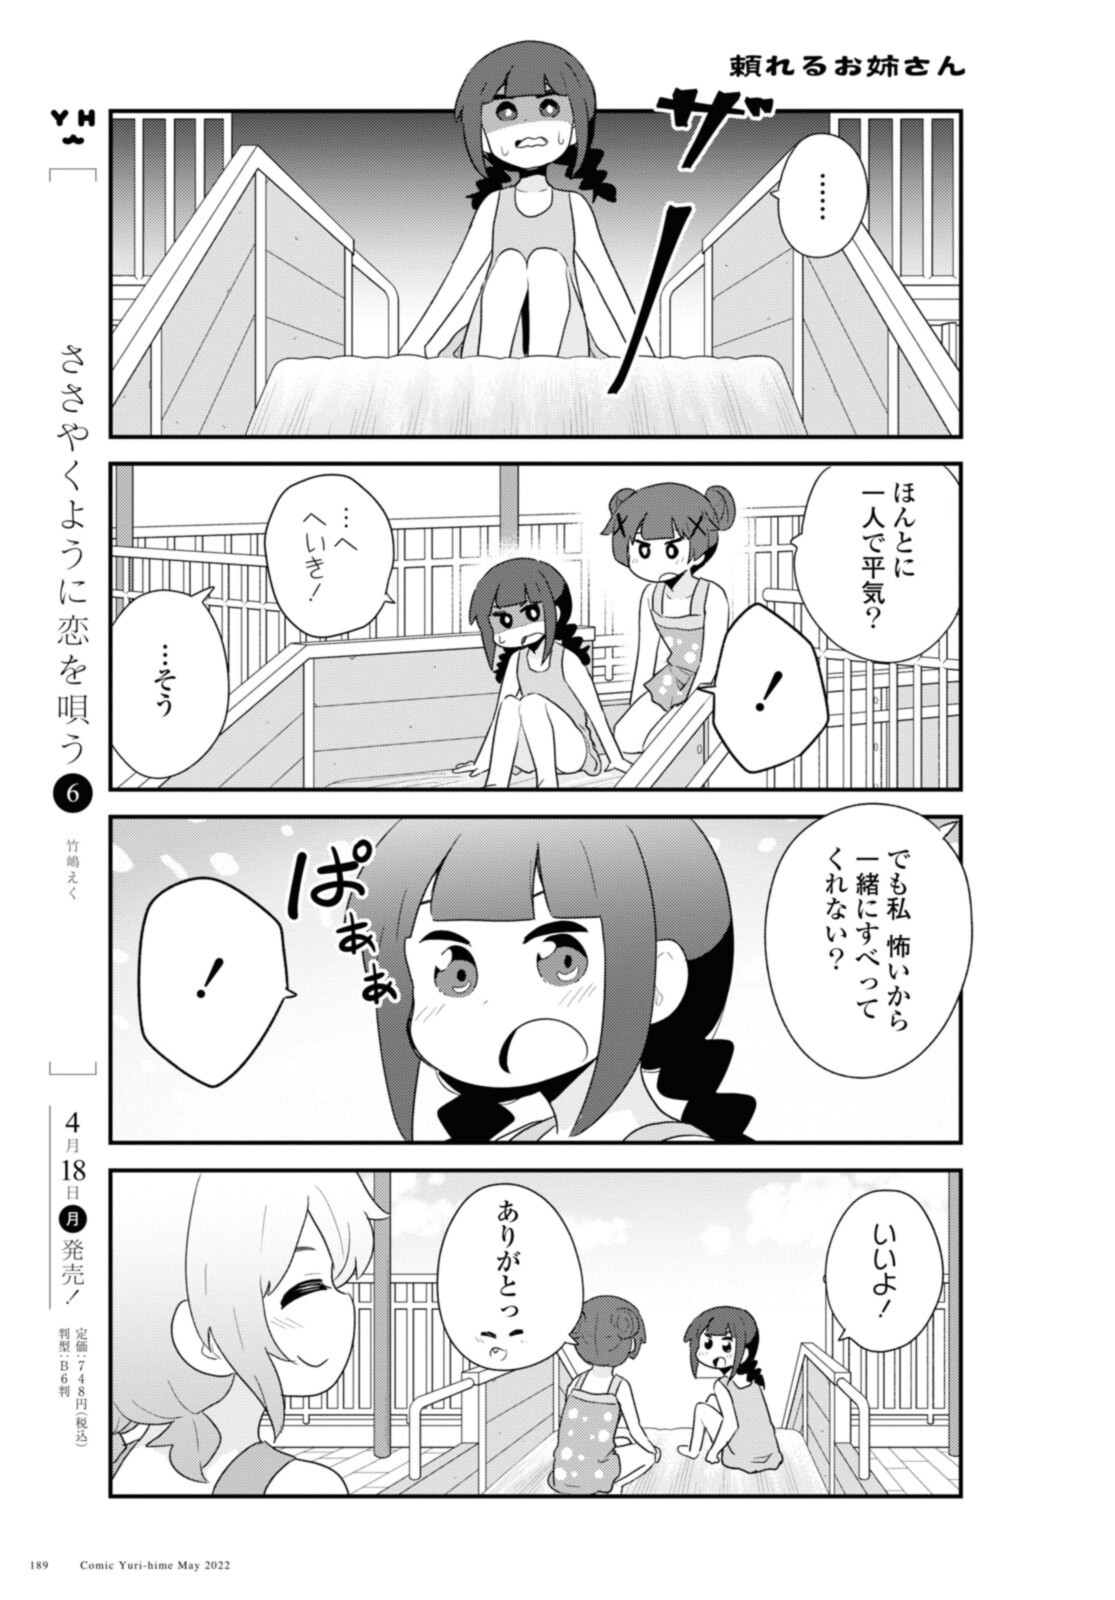 Wataten! An Angel Flew Down to Me 私に天使が舞い降りた！ 第95話 - Page 7